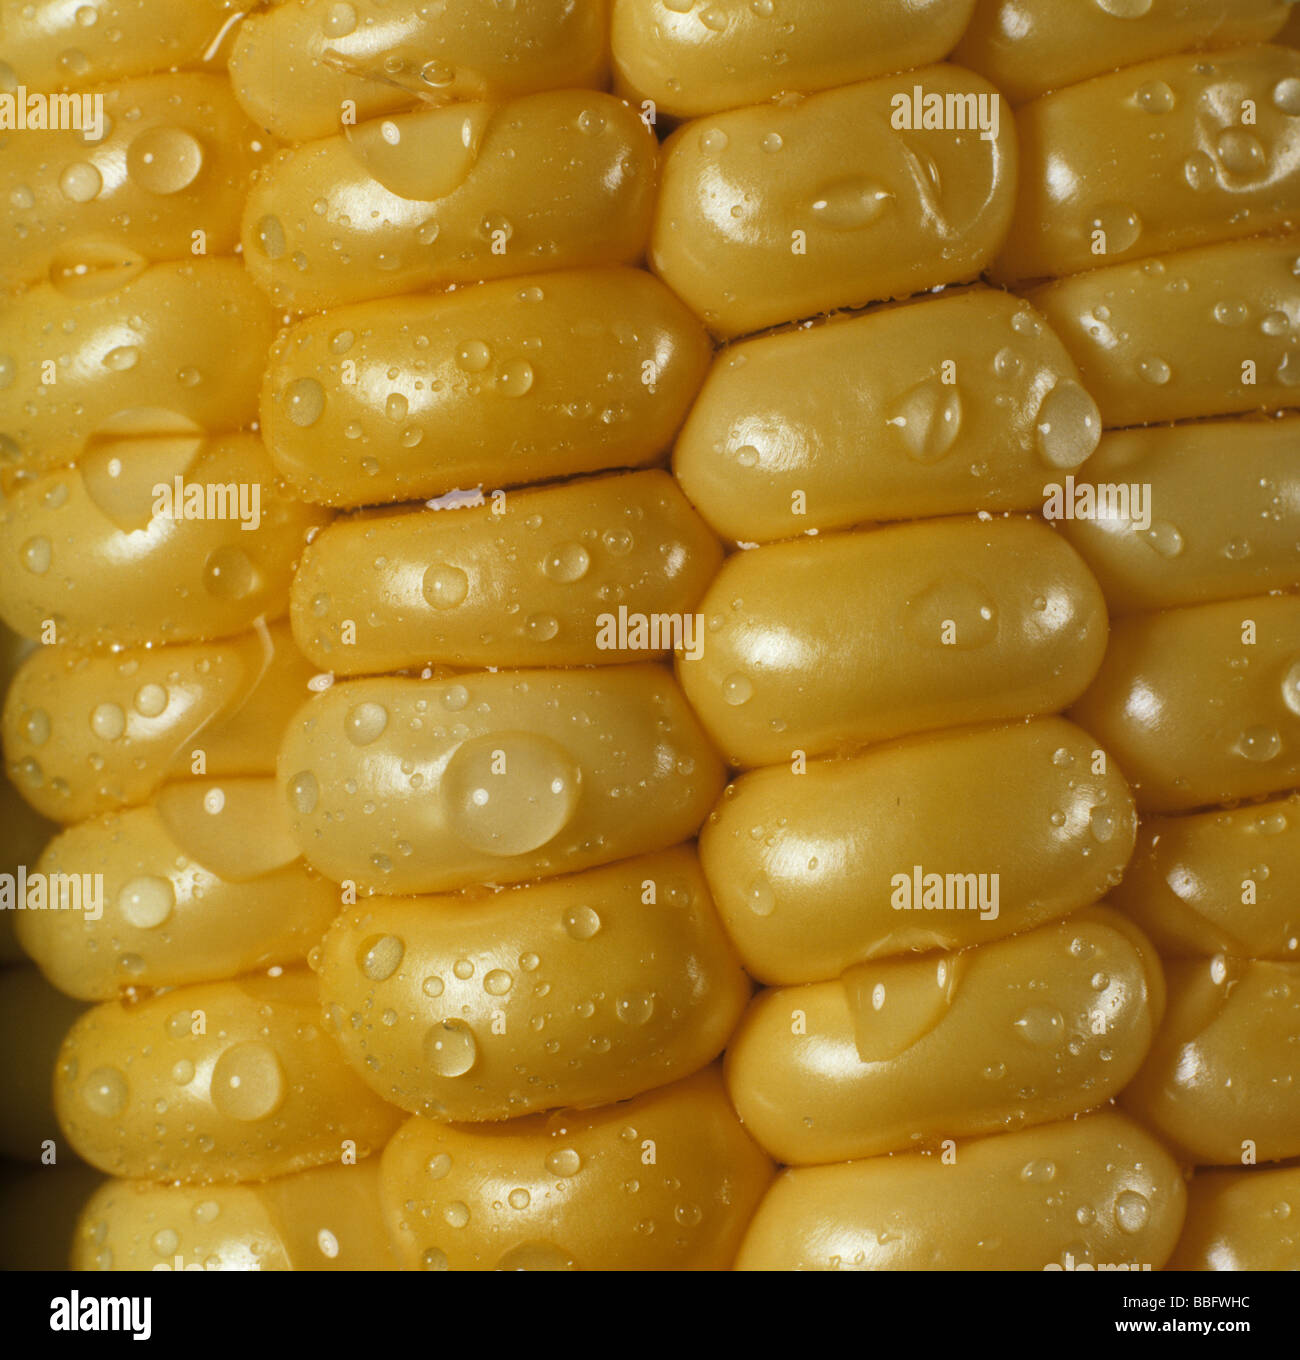 Exposed grains of maize sweetcorn or corn on the cob Stock Photo